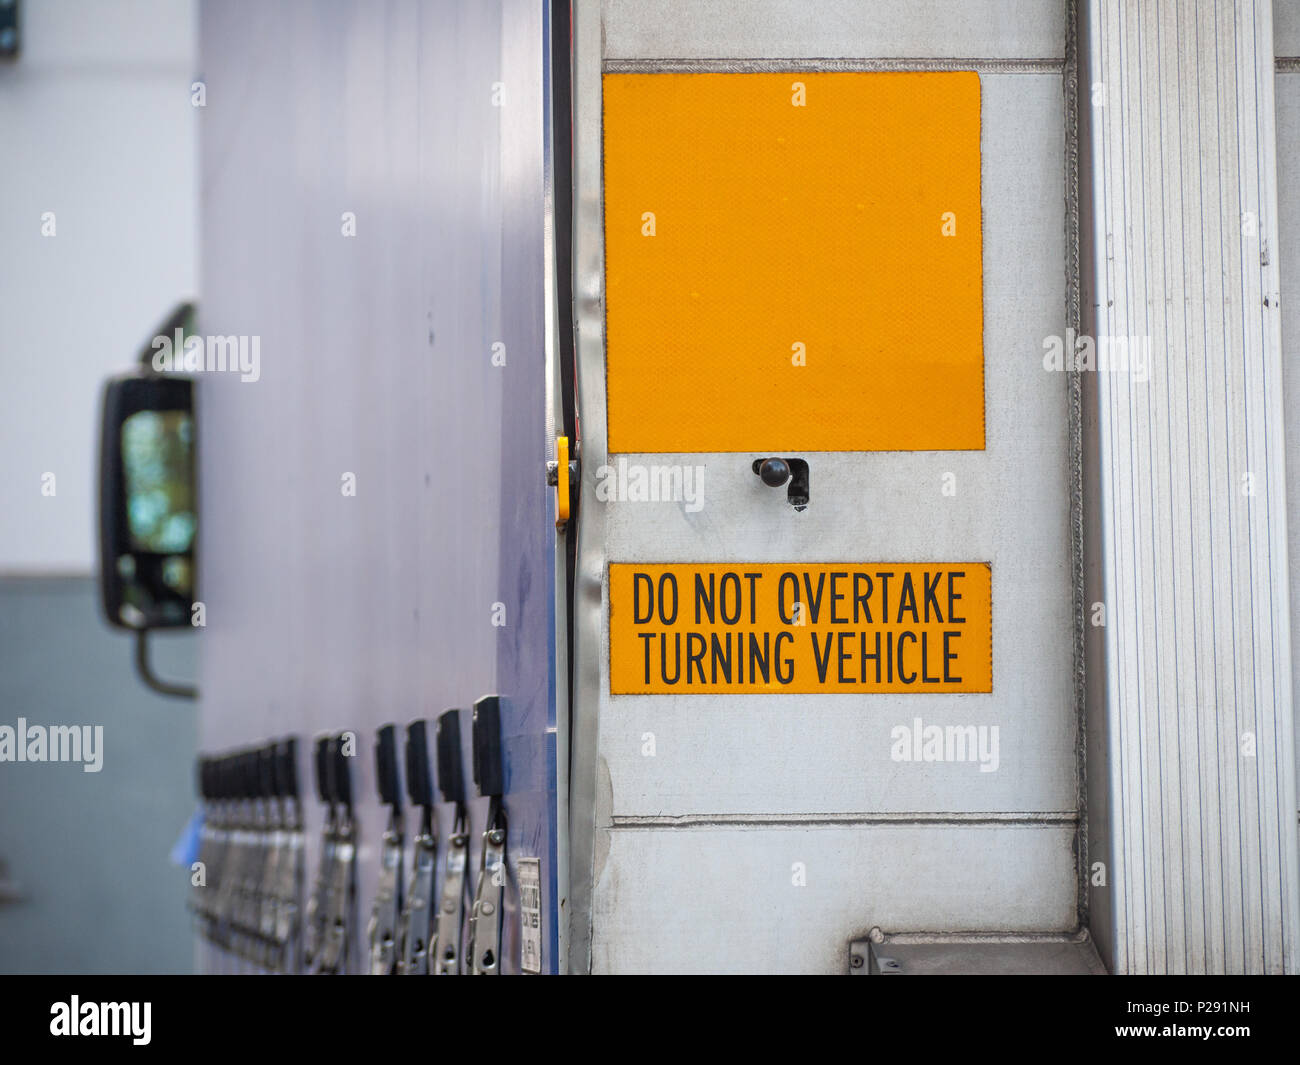 Warning sign of Do not overtake turning vehicle attached to the rear of a truck. Melbourne, VIC Australia Stock Photo